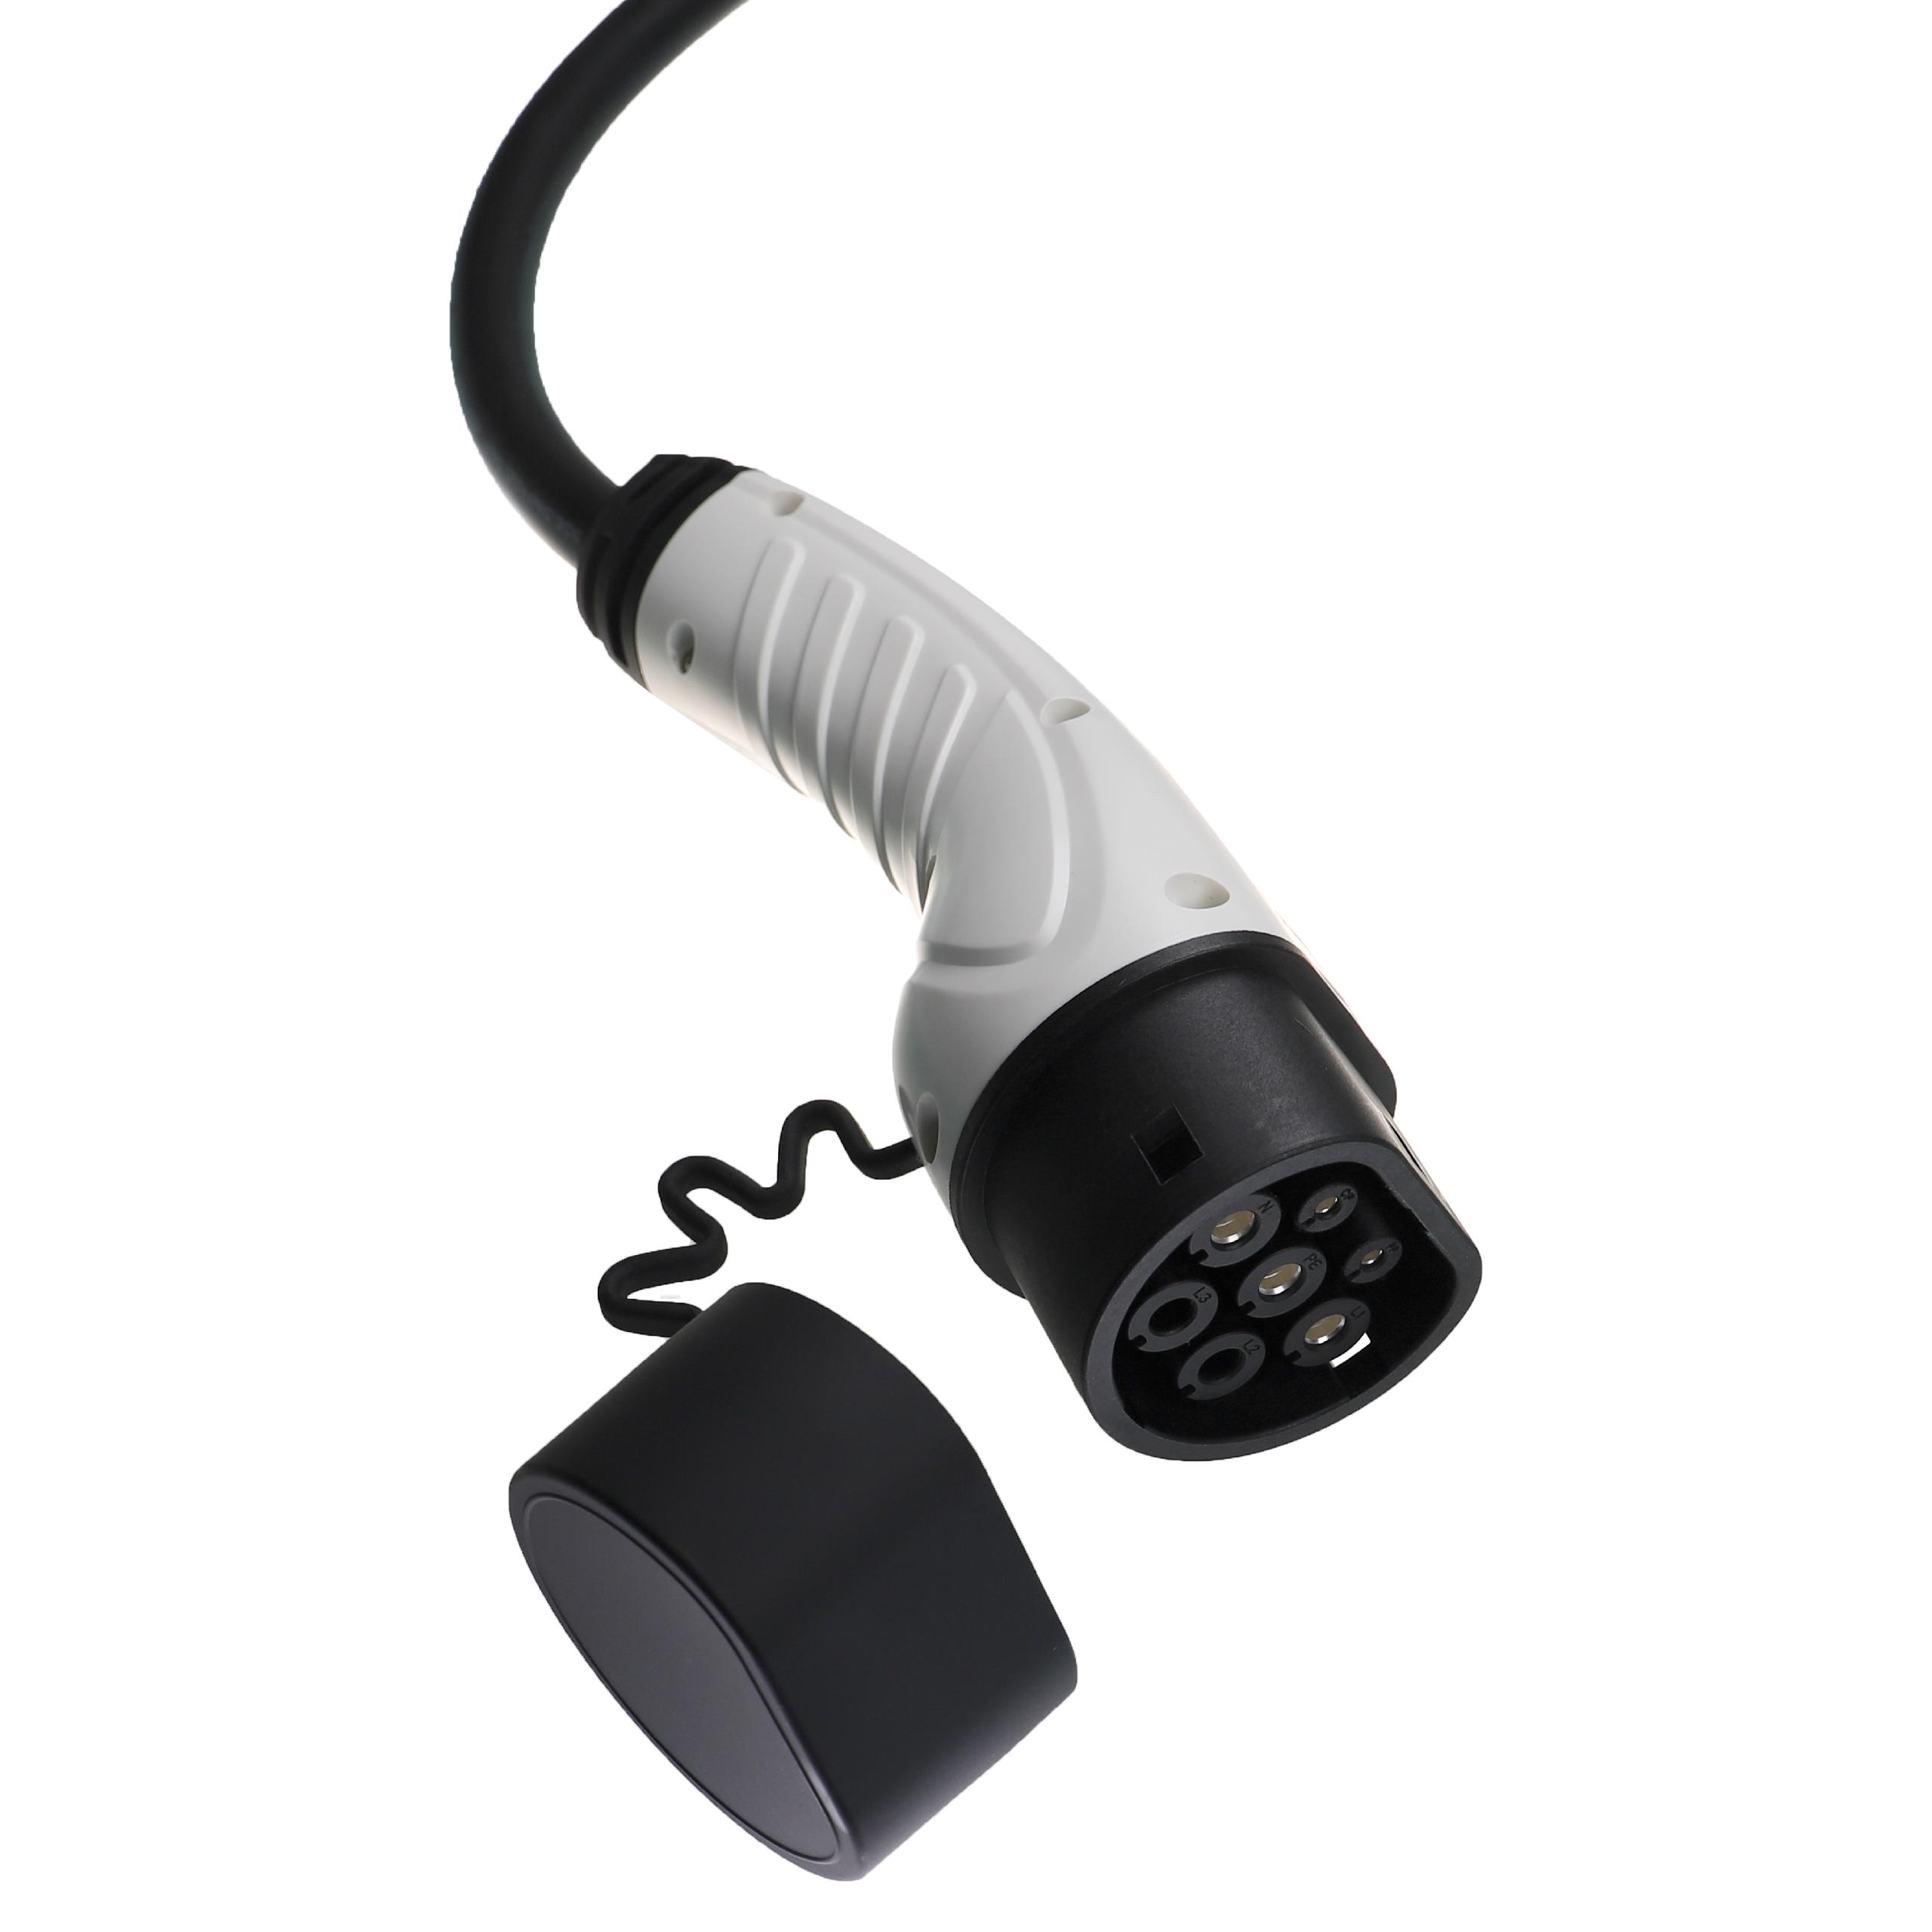 Charging Cable for Electric Car, Plug-In Hybrid - Type 2 to Type 2 Cable, Single-Phase, 32 A, 7 kW, 5 m